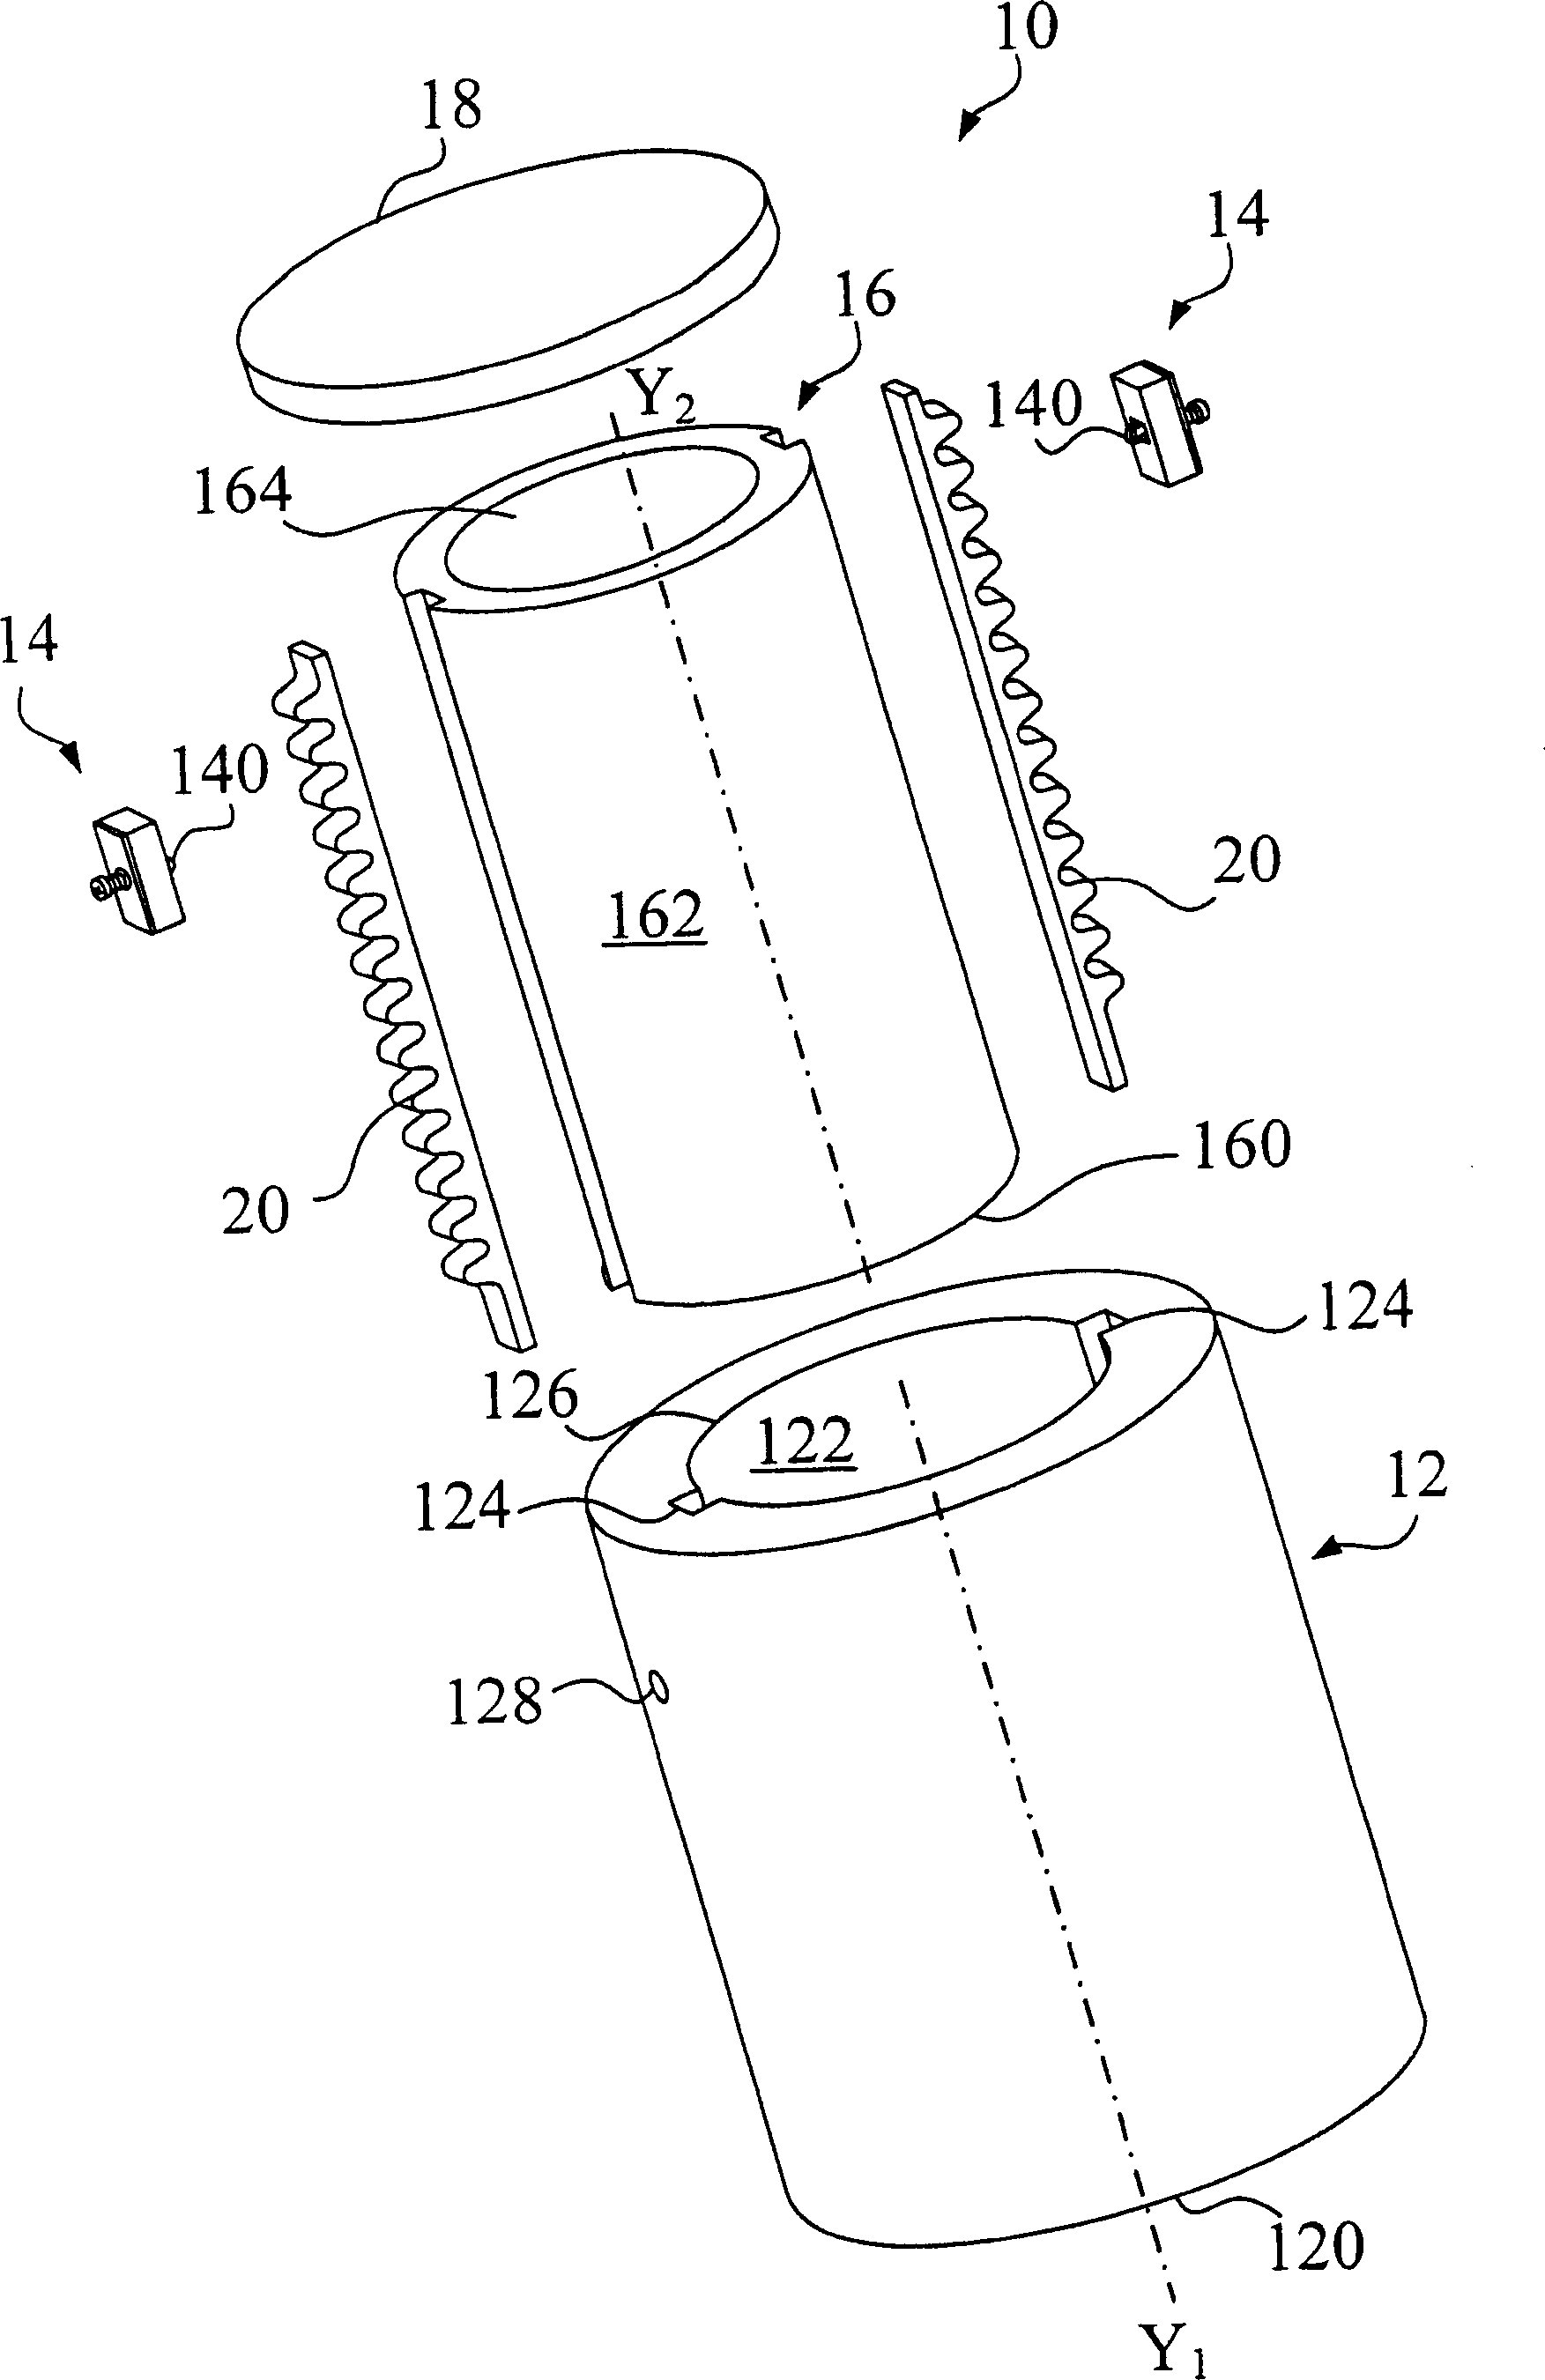 Adjustable lifting support apparatus